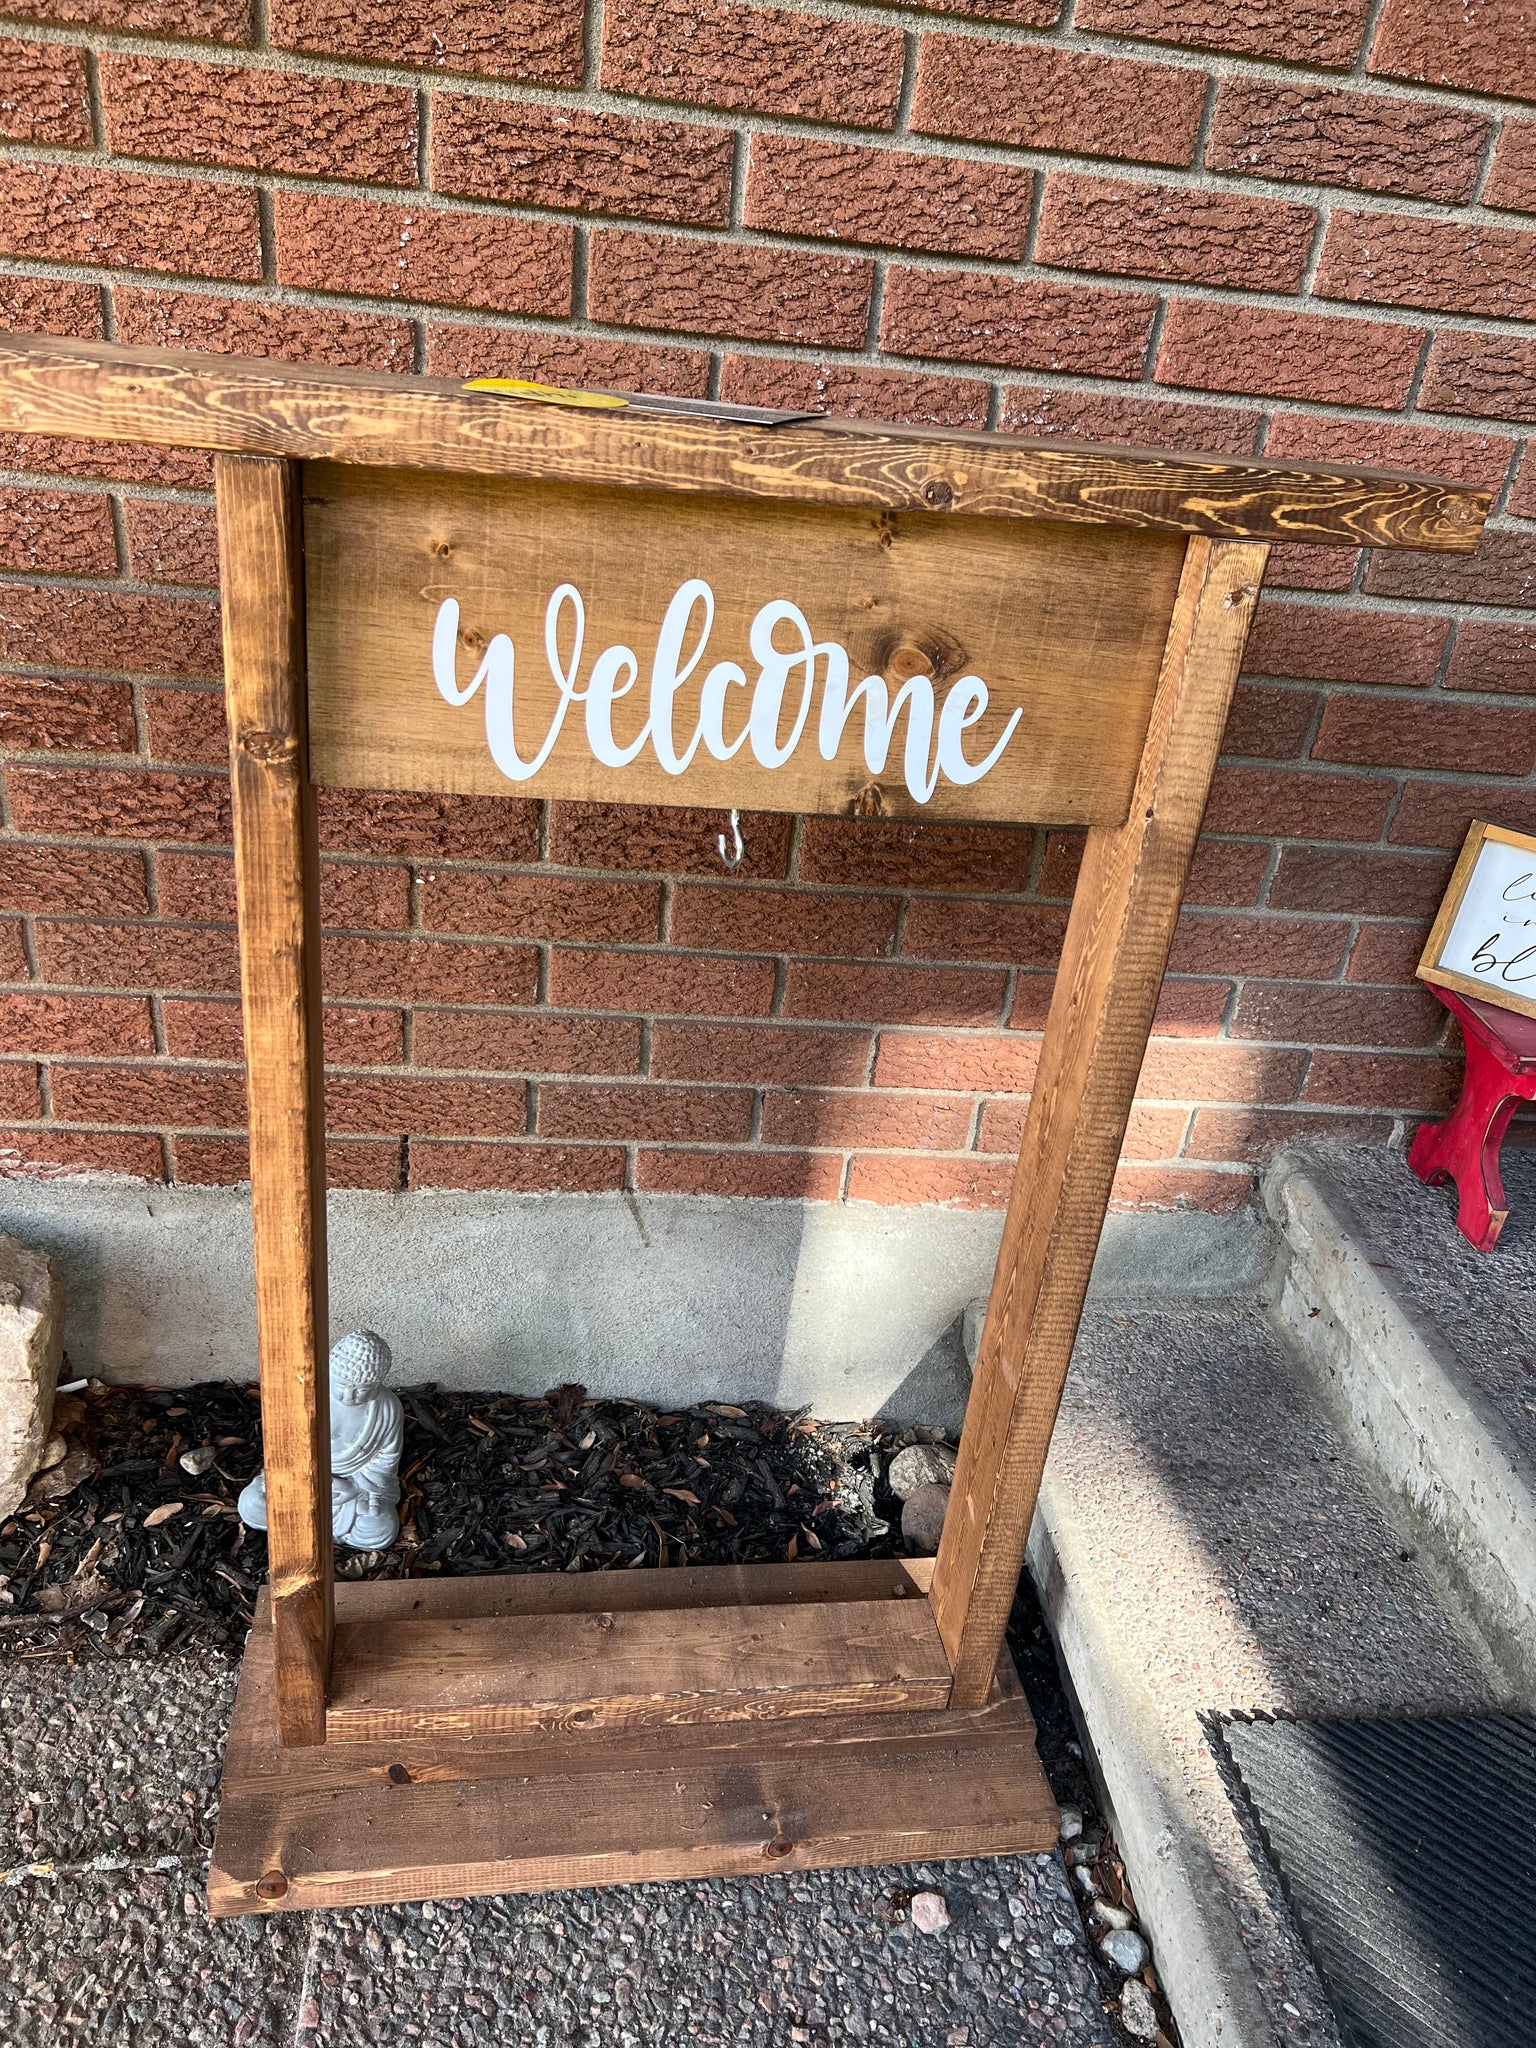 Welcome - Hanging planter